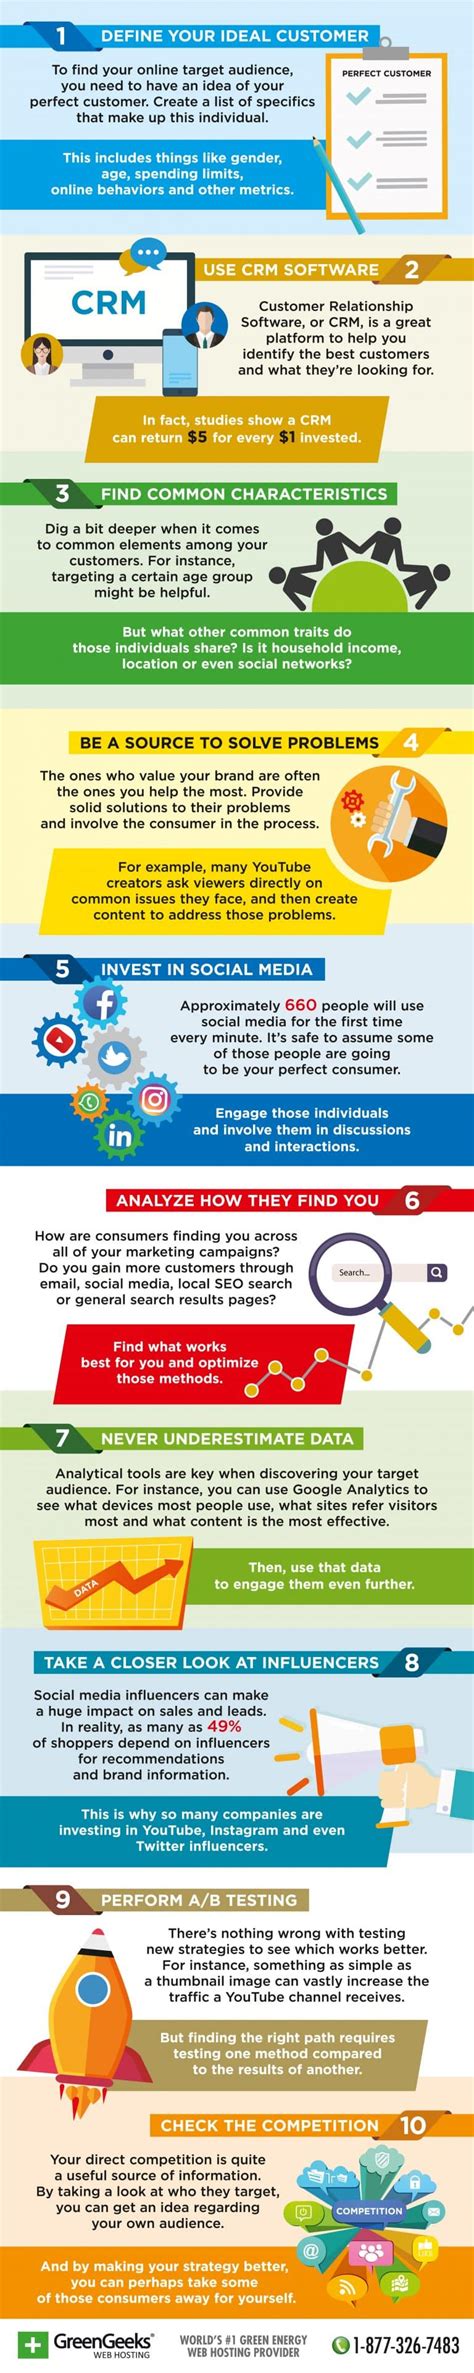 10 Proven Ways To Find Your Online Target Audience Infographic